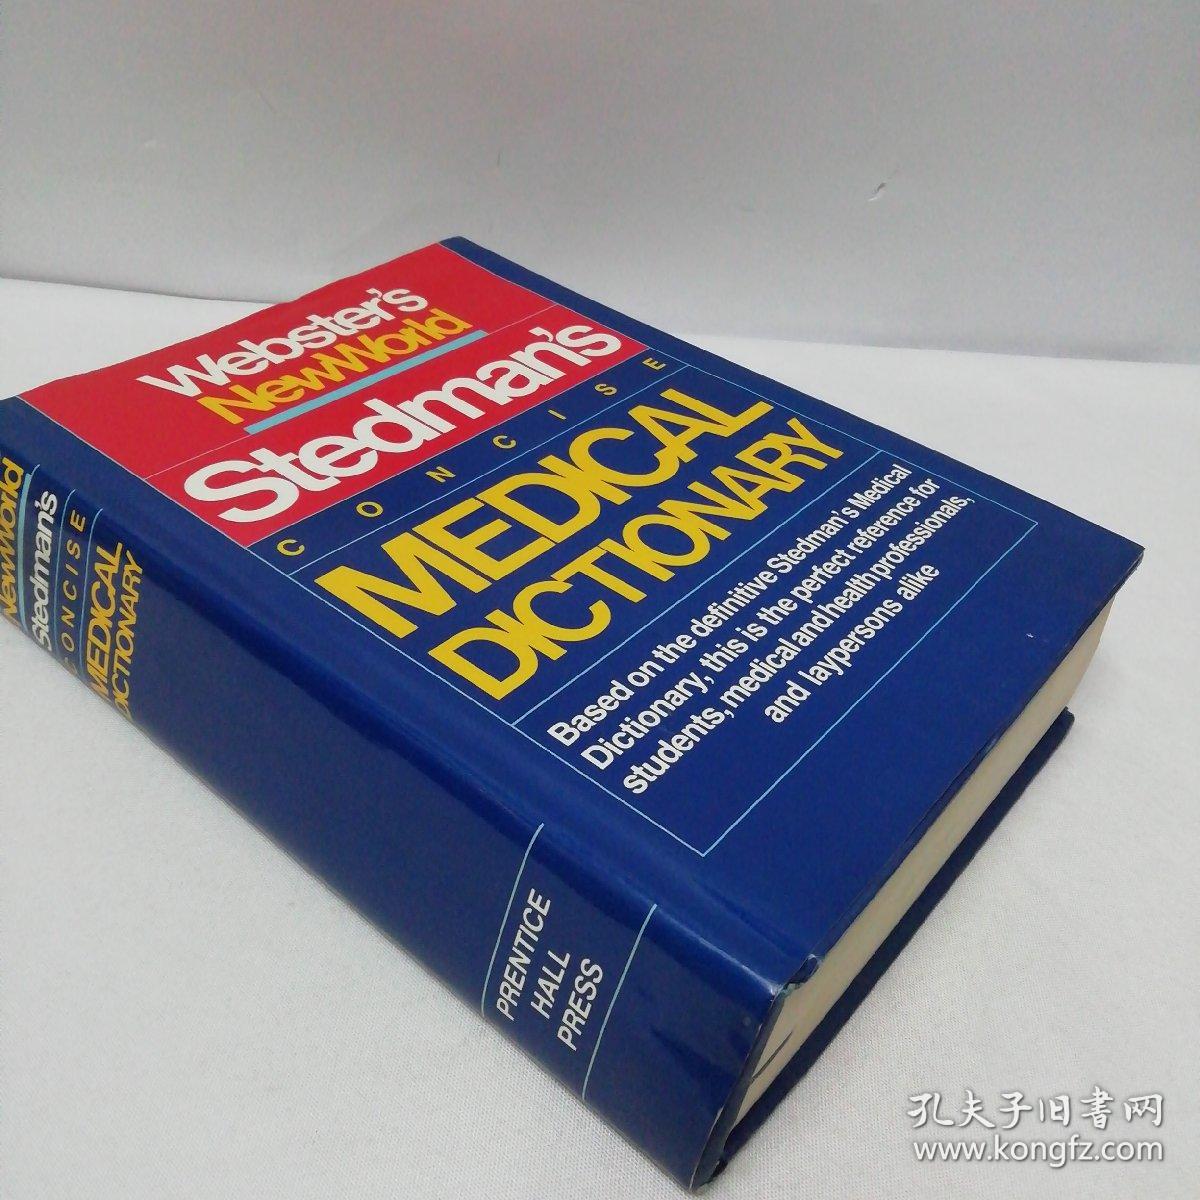 WEBSTER'S NEW WOLD:MEDICAL DICTIONARY